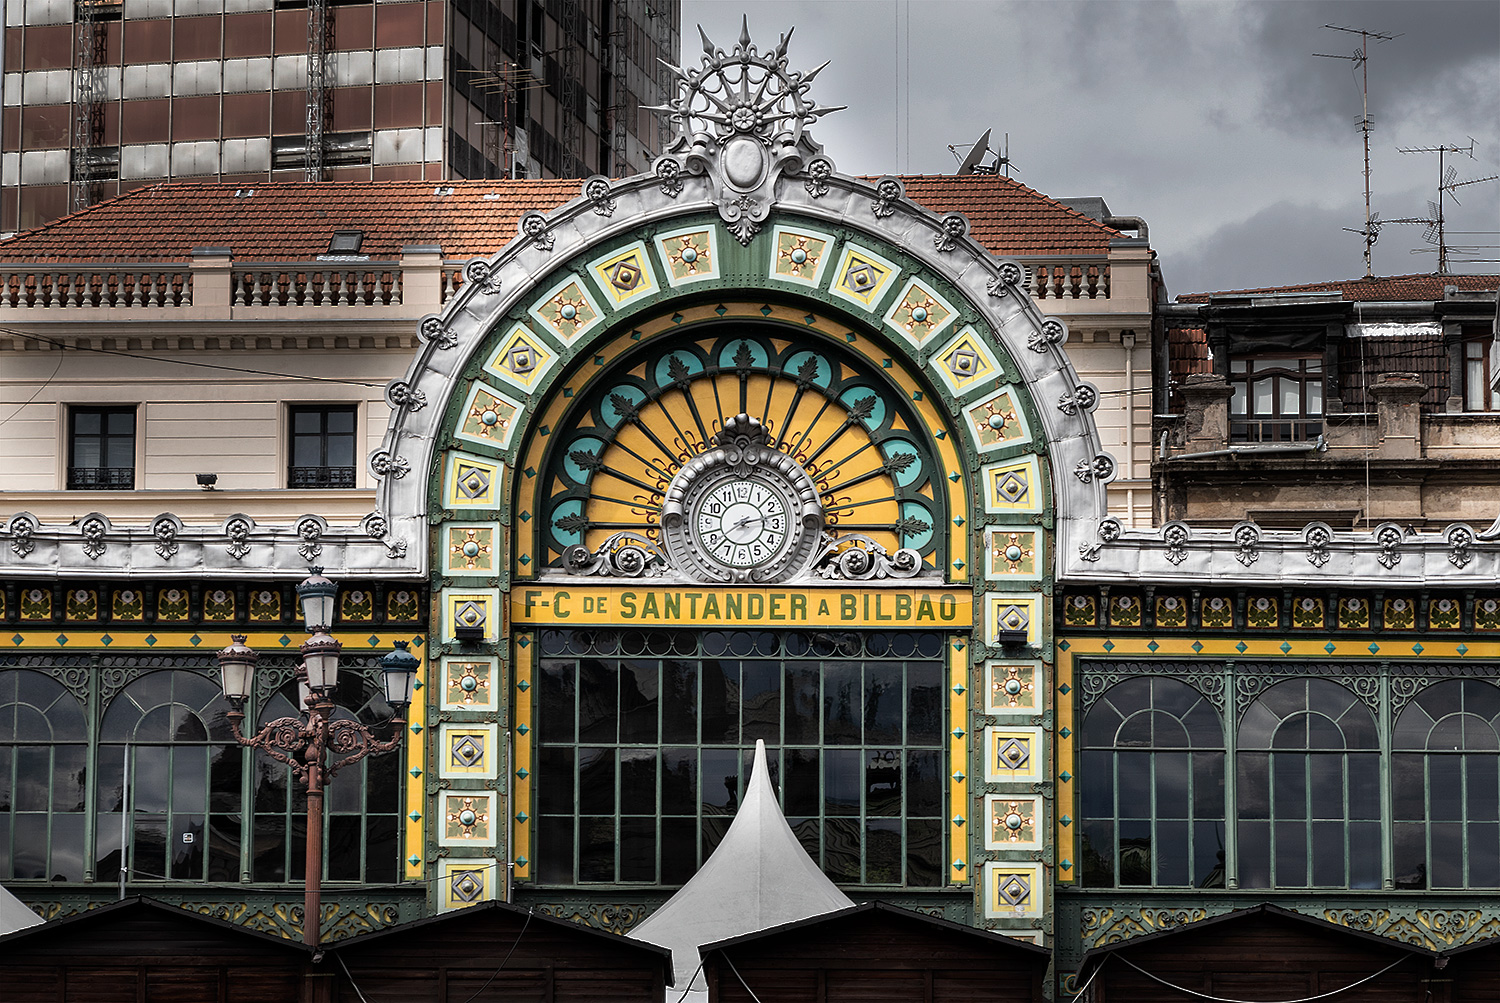 The city's Old Station is one of the must-sees in Bilbao.